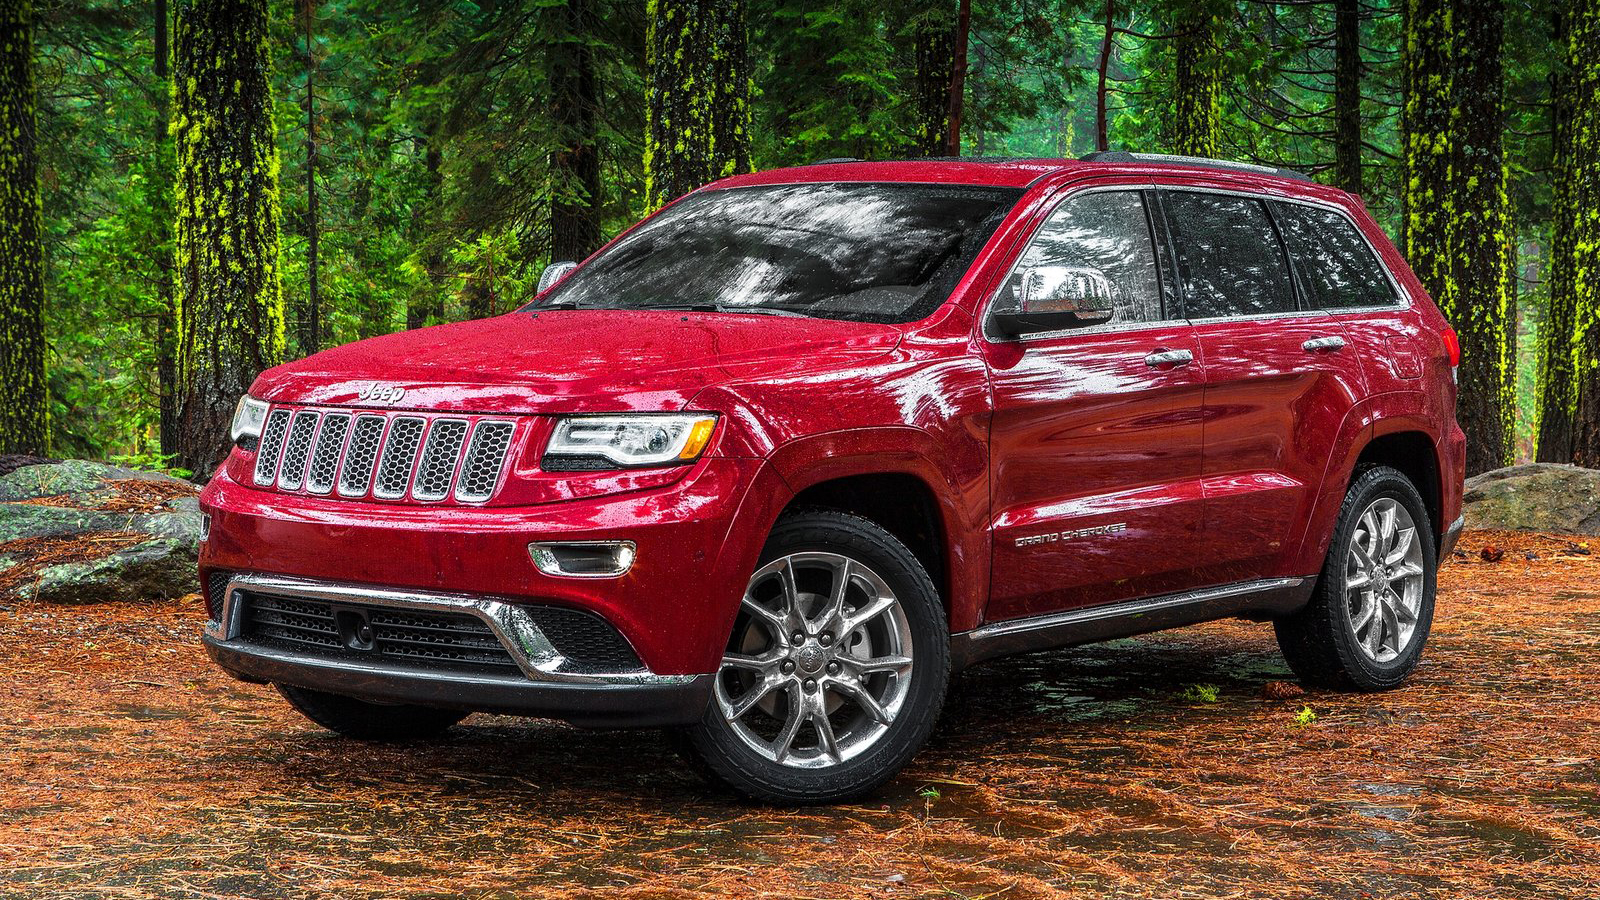 Car Wallpapers in Good Images 2014 Jeep Grand Cherokee